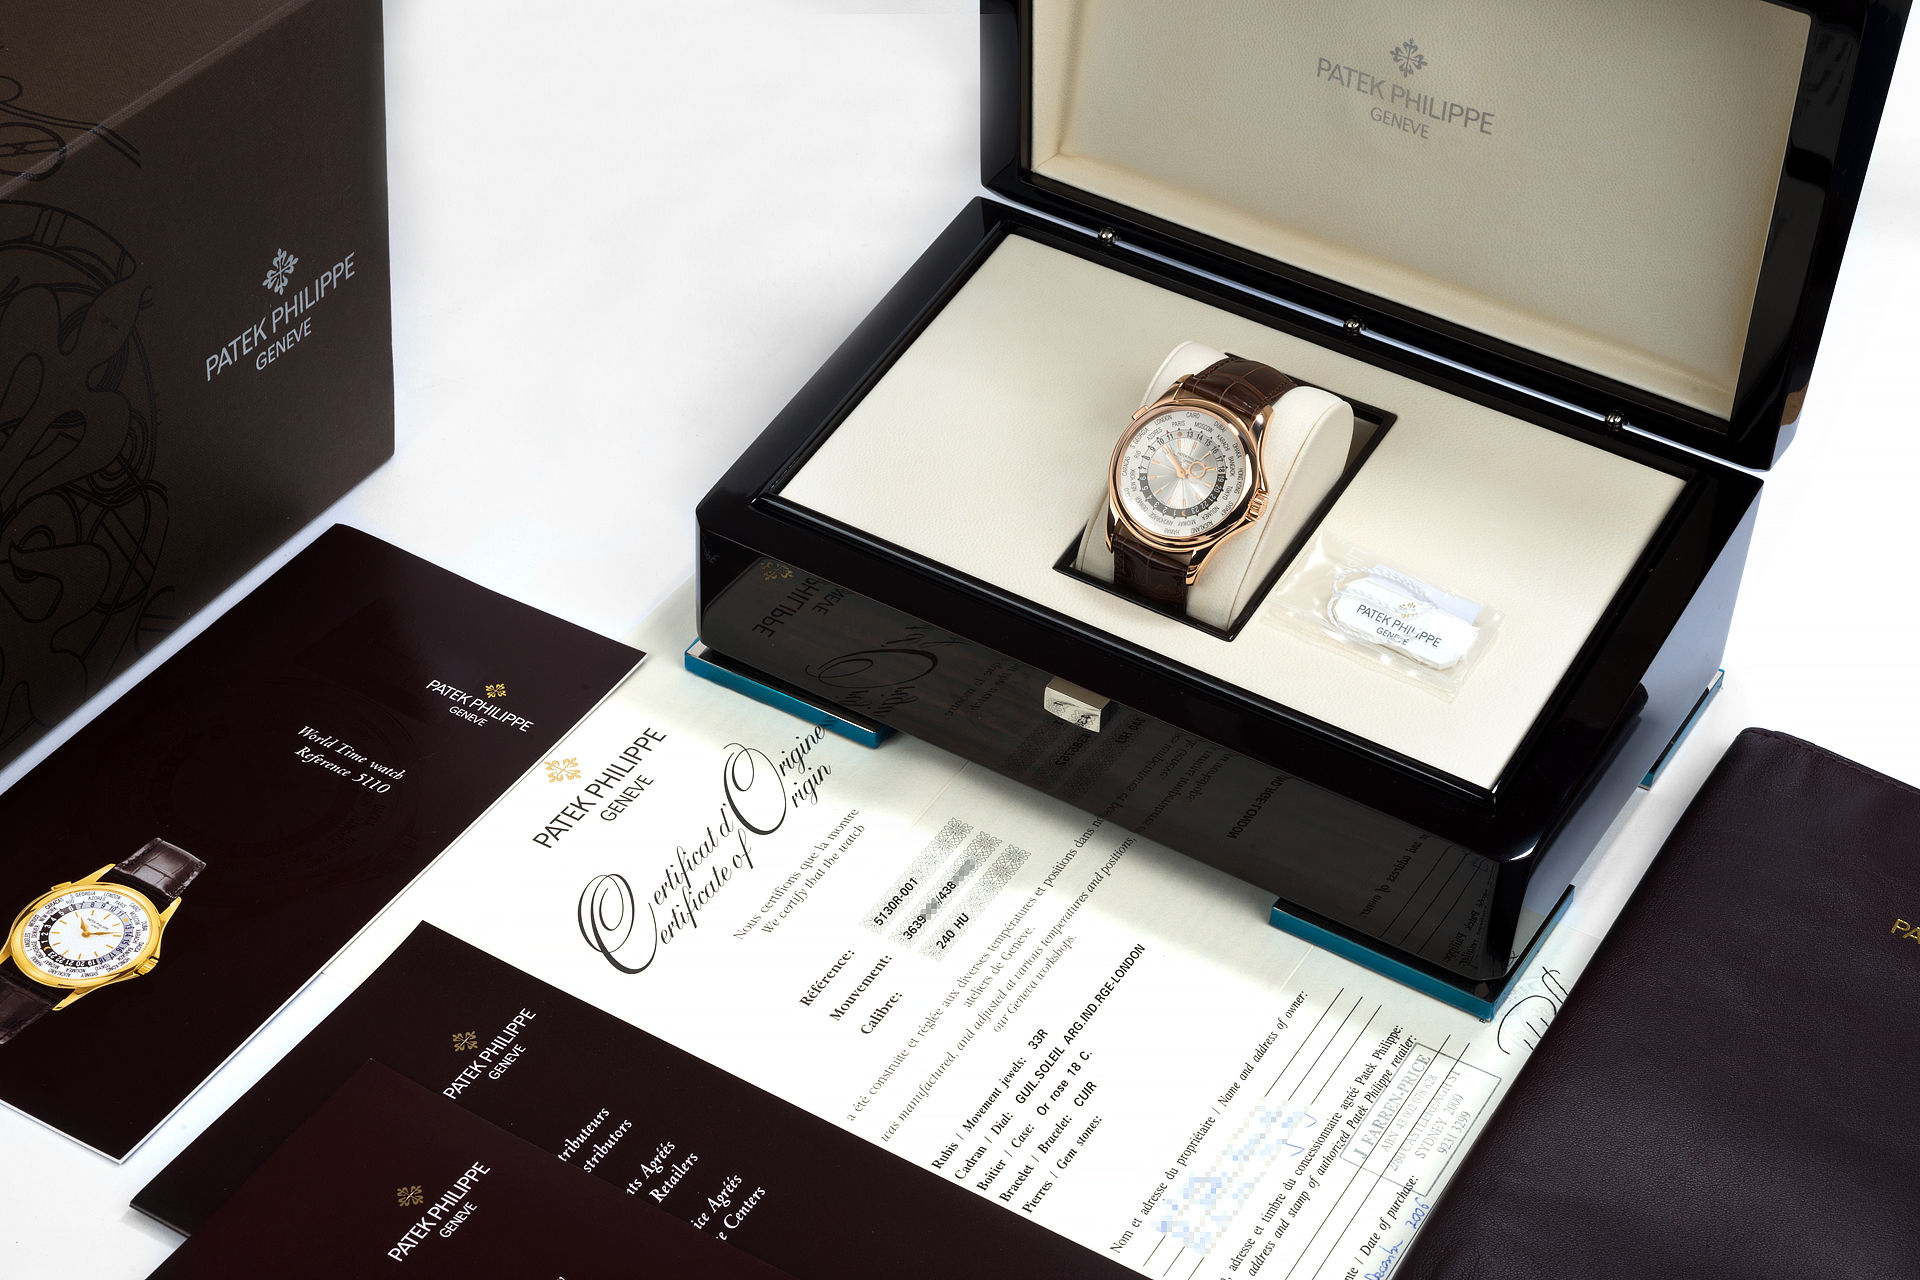 ref 5130R-001 | Complete With Box & Papers | Patek Philippe World Time